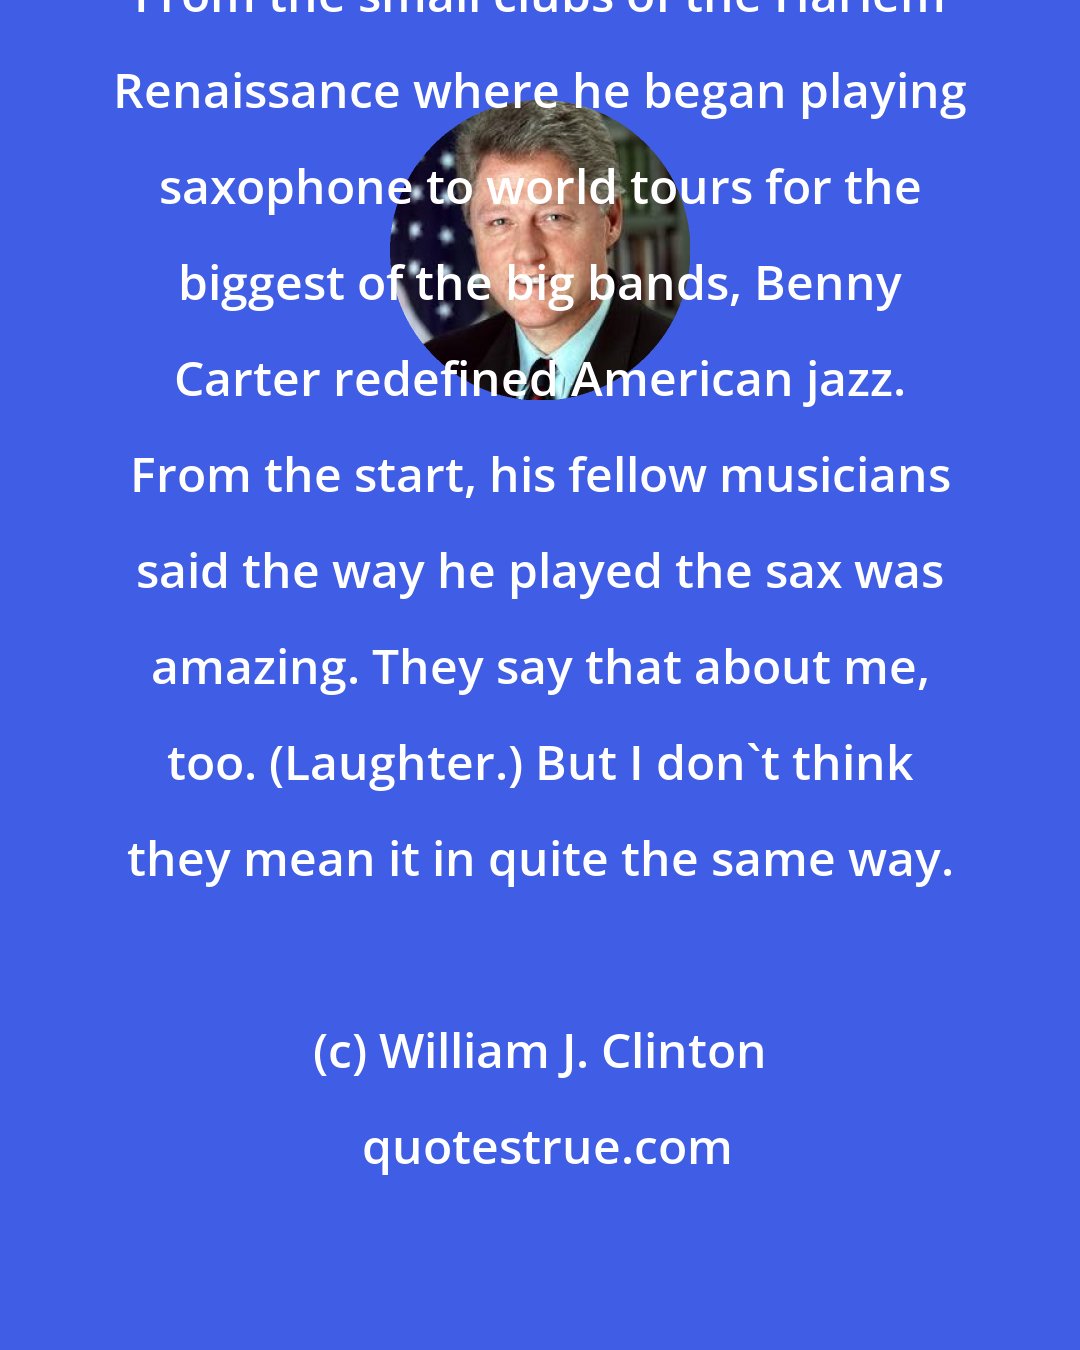 William J. Clinton: From the small clubs of the Harlem Renaissance where he began playing saxophone to world tours for the biggest of the big bands, Benny Carter redefined American jazz. From the start, his fellow musicians said the way he played the sax was amazing. They say that about me, too. (Laughter.) But I don't think they mean it in quite the same way.